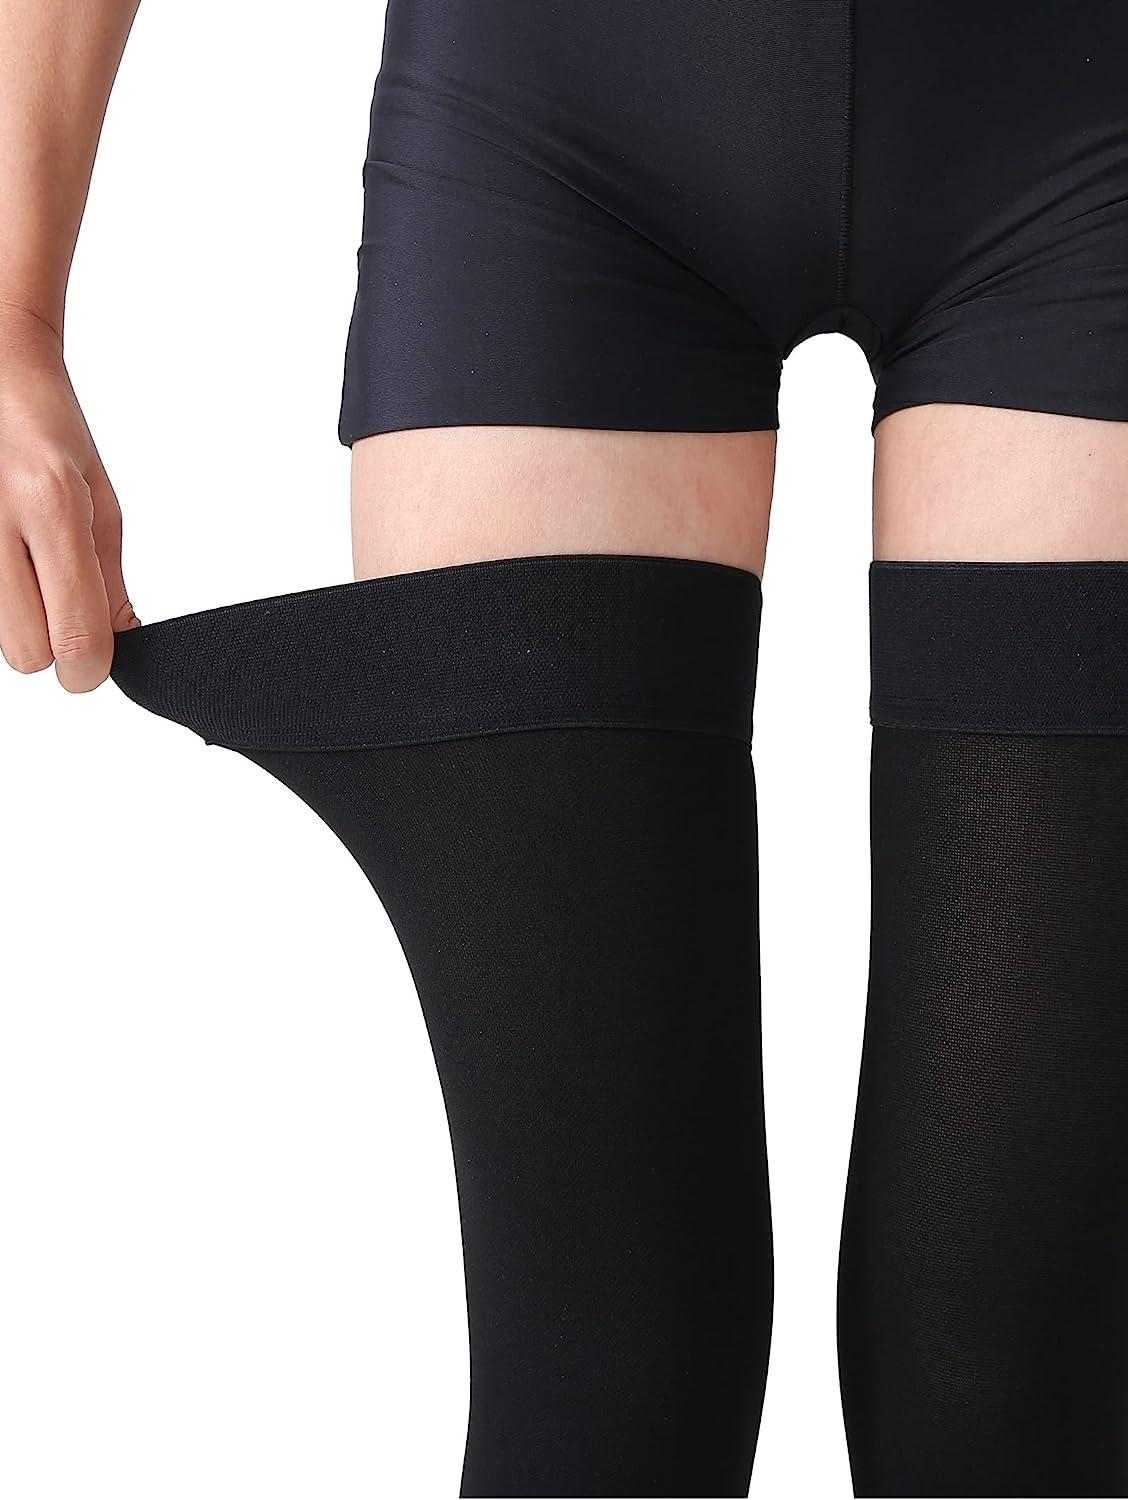 Thigh High Compression Stockings, Closed Toe, Pair, Firm Support